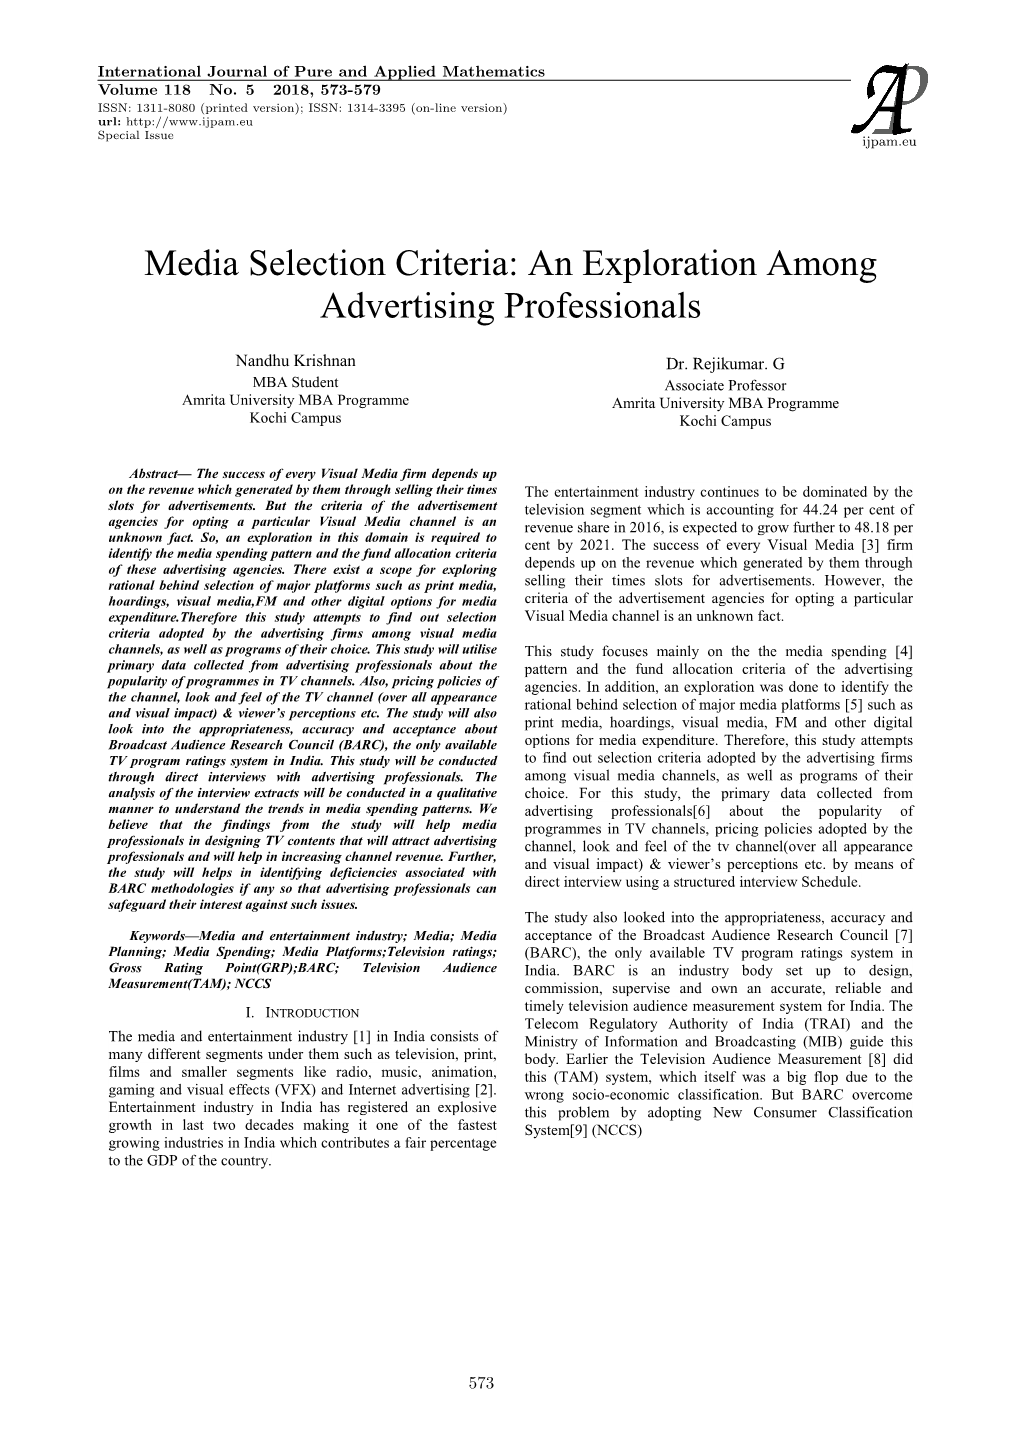 Media Selection Criteria: an Exploration Among Advertising Professionals